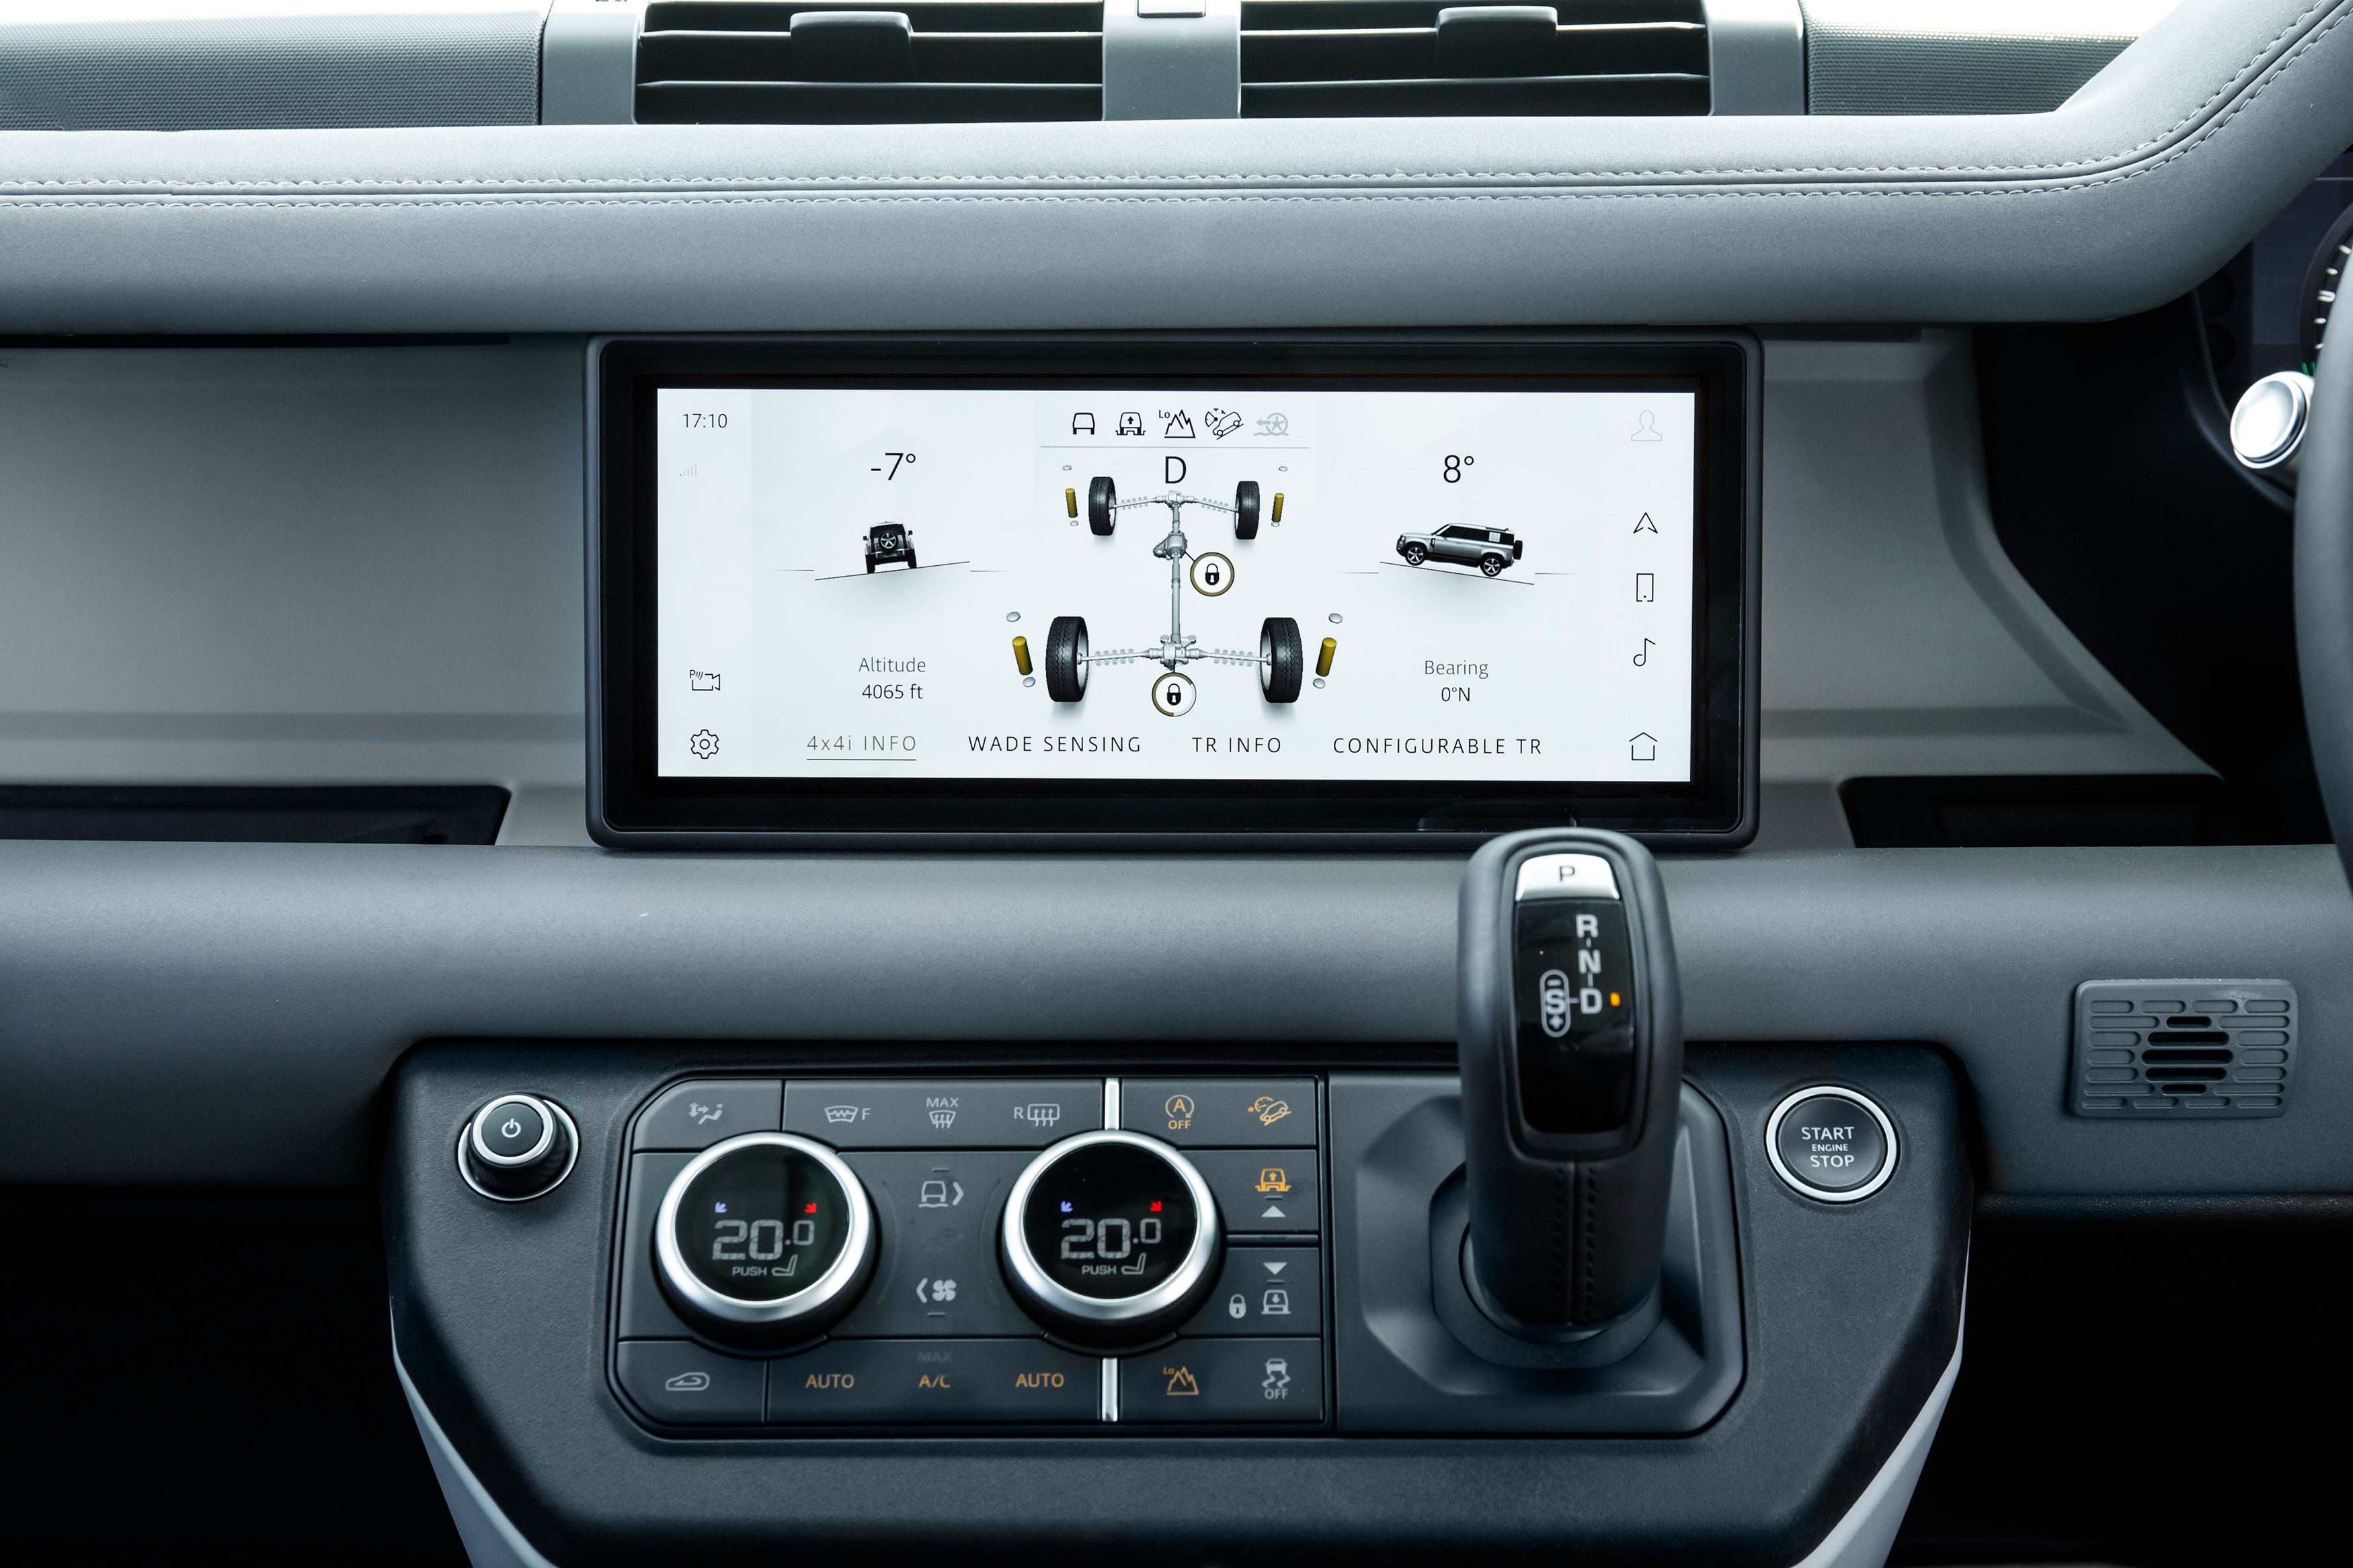 The center control stack and infotainment system in the Defender